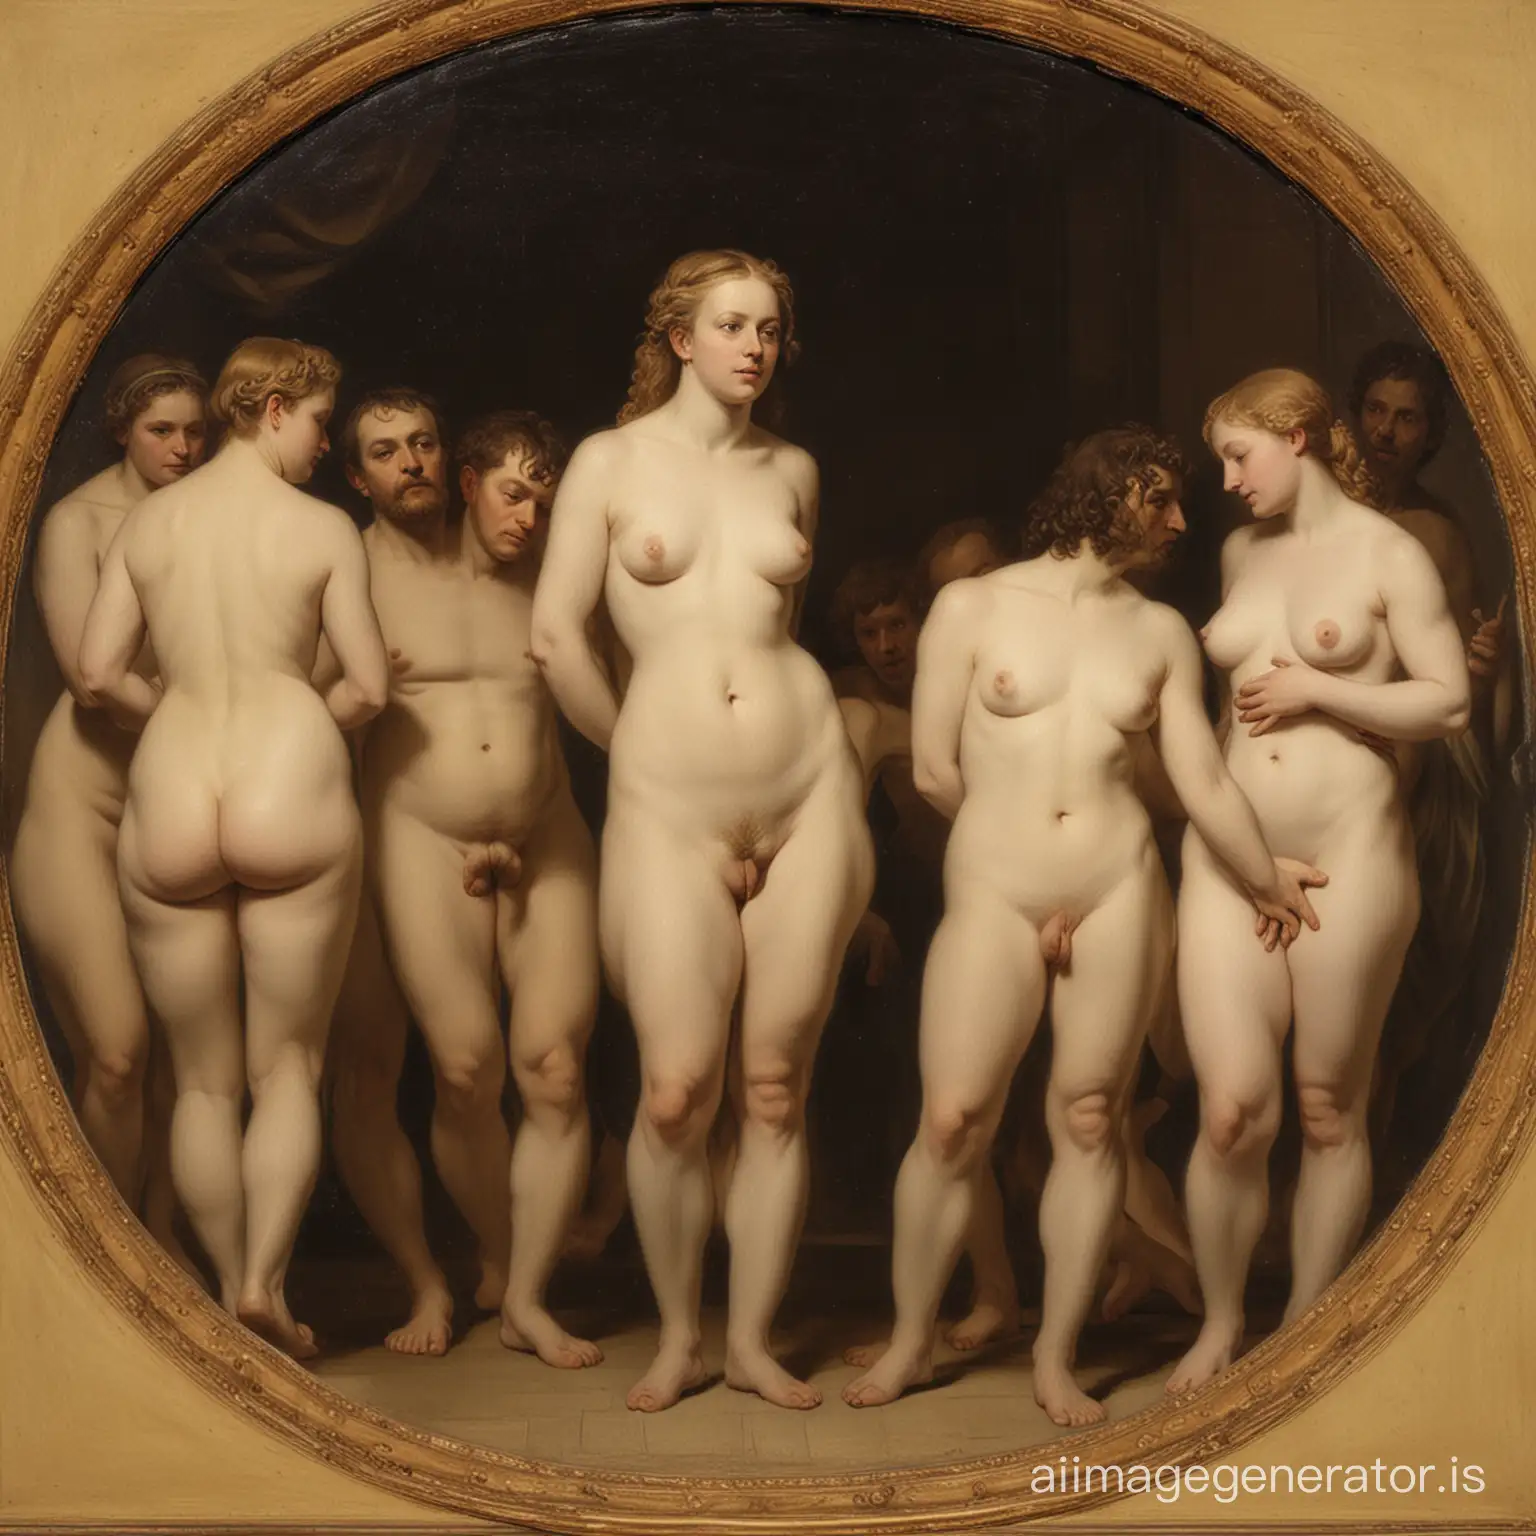 Nude-Figures-Inspired-by-William-Blake-in-RembrandtInspired-Artwork